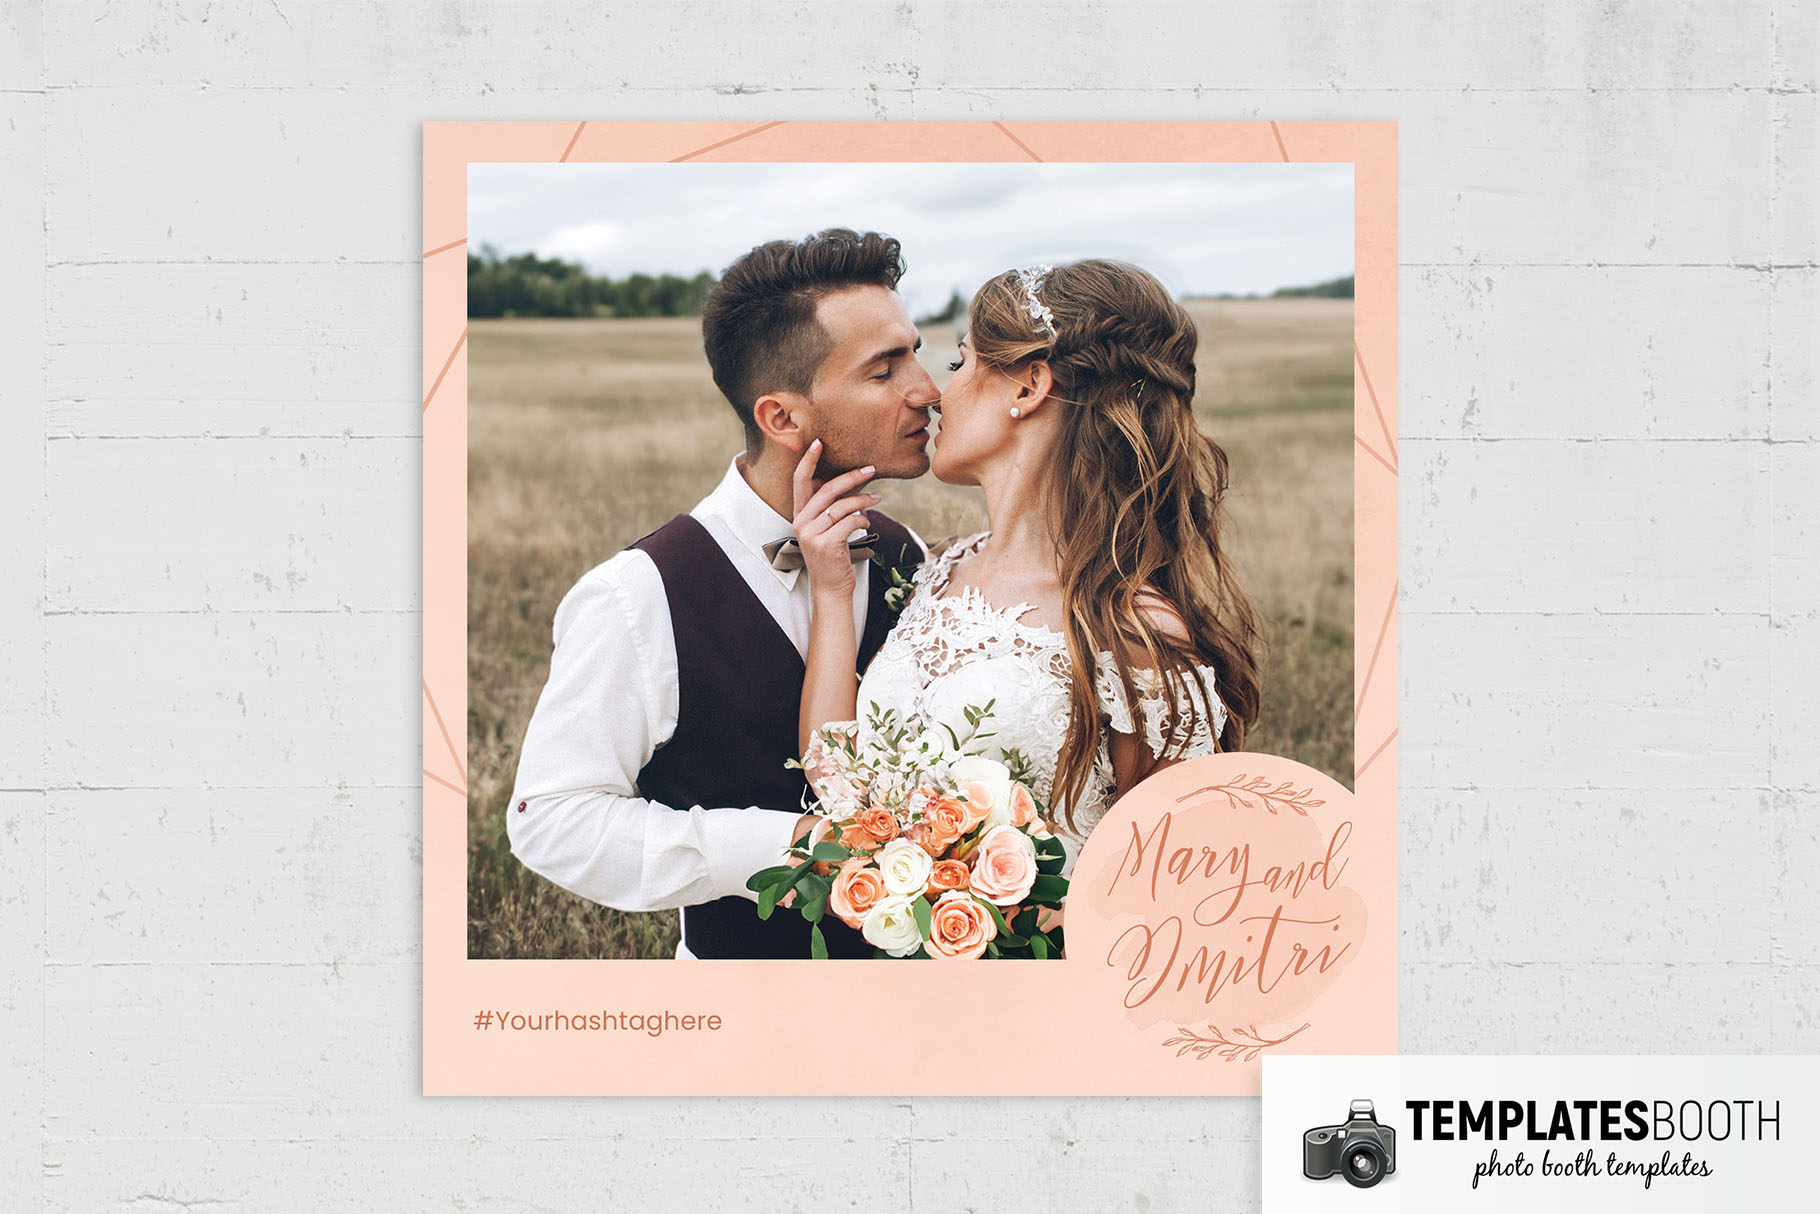 Just Peachy Wedding Photo Booth Template